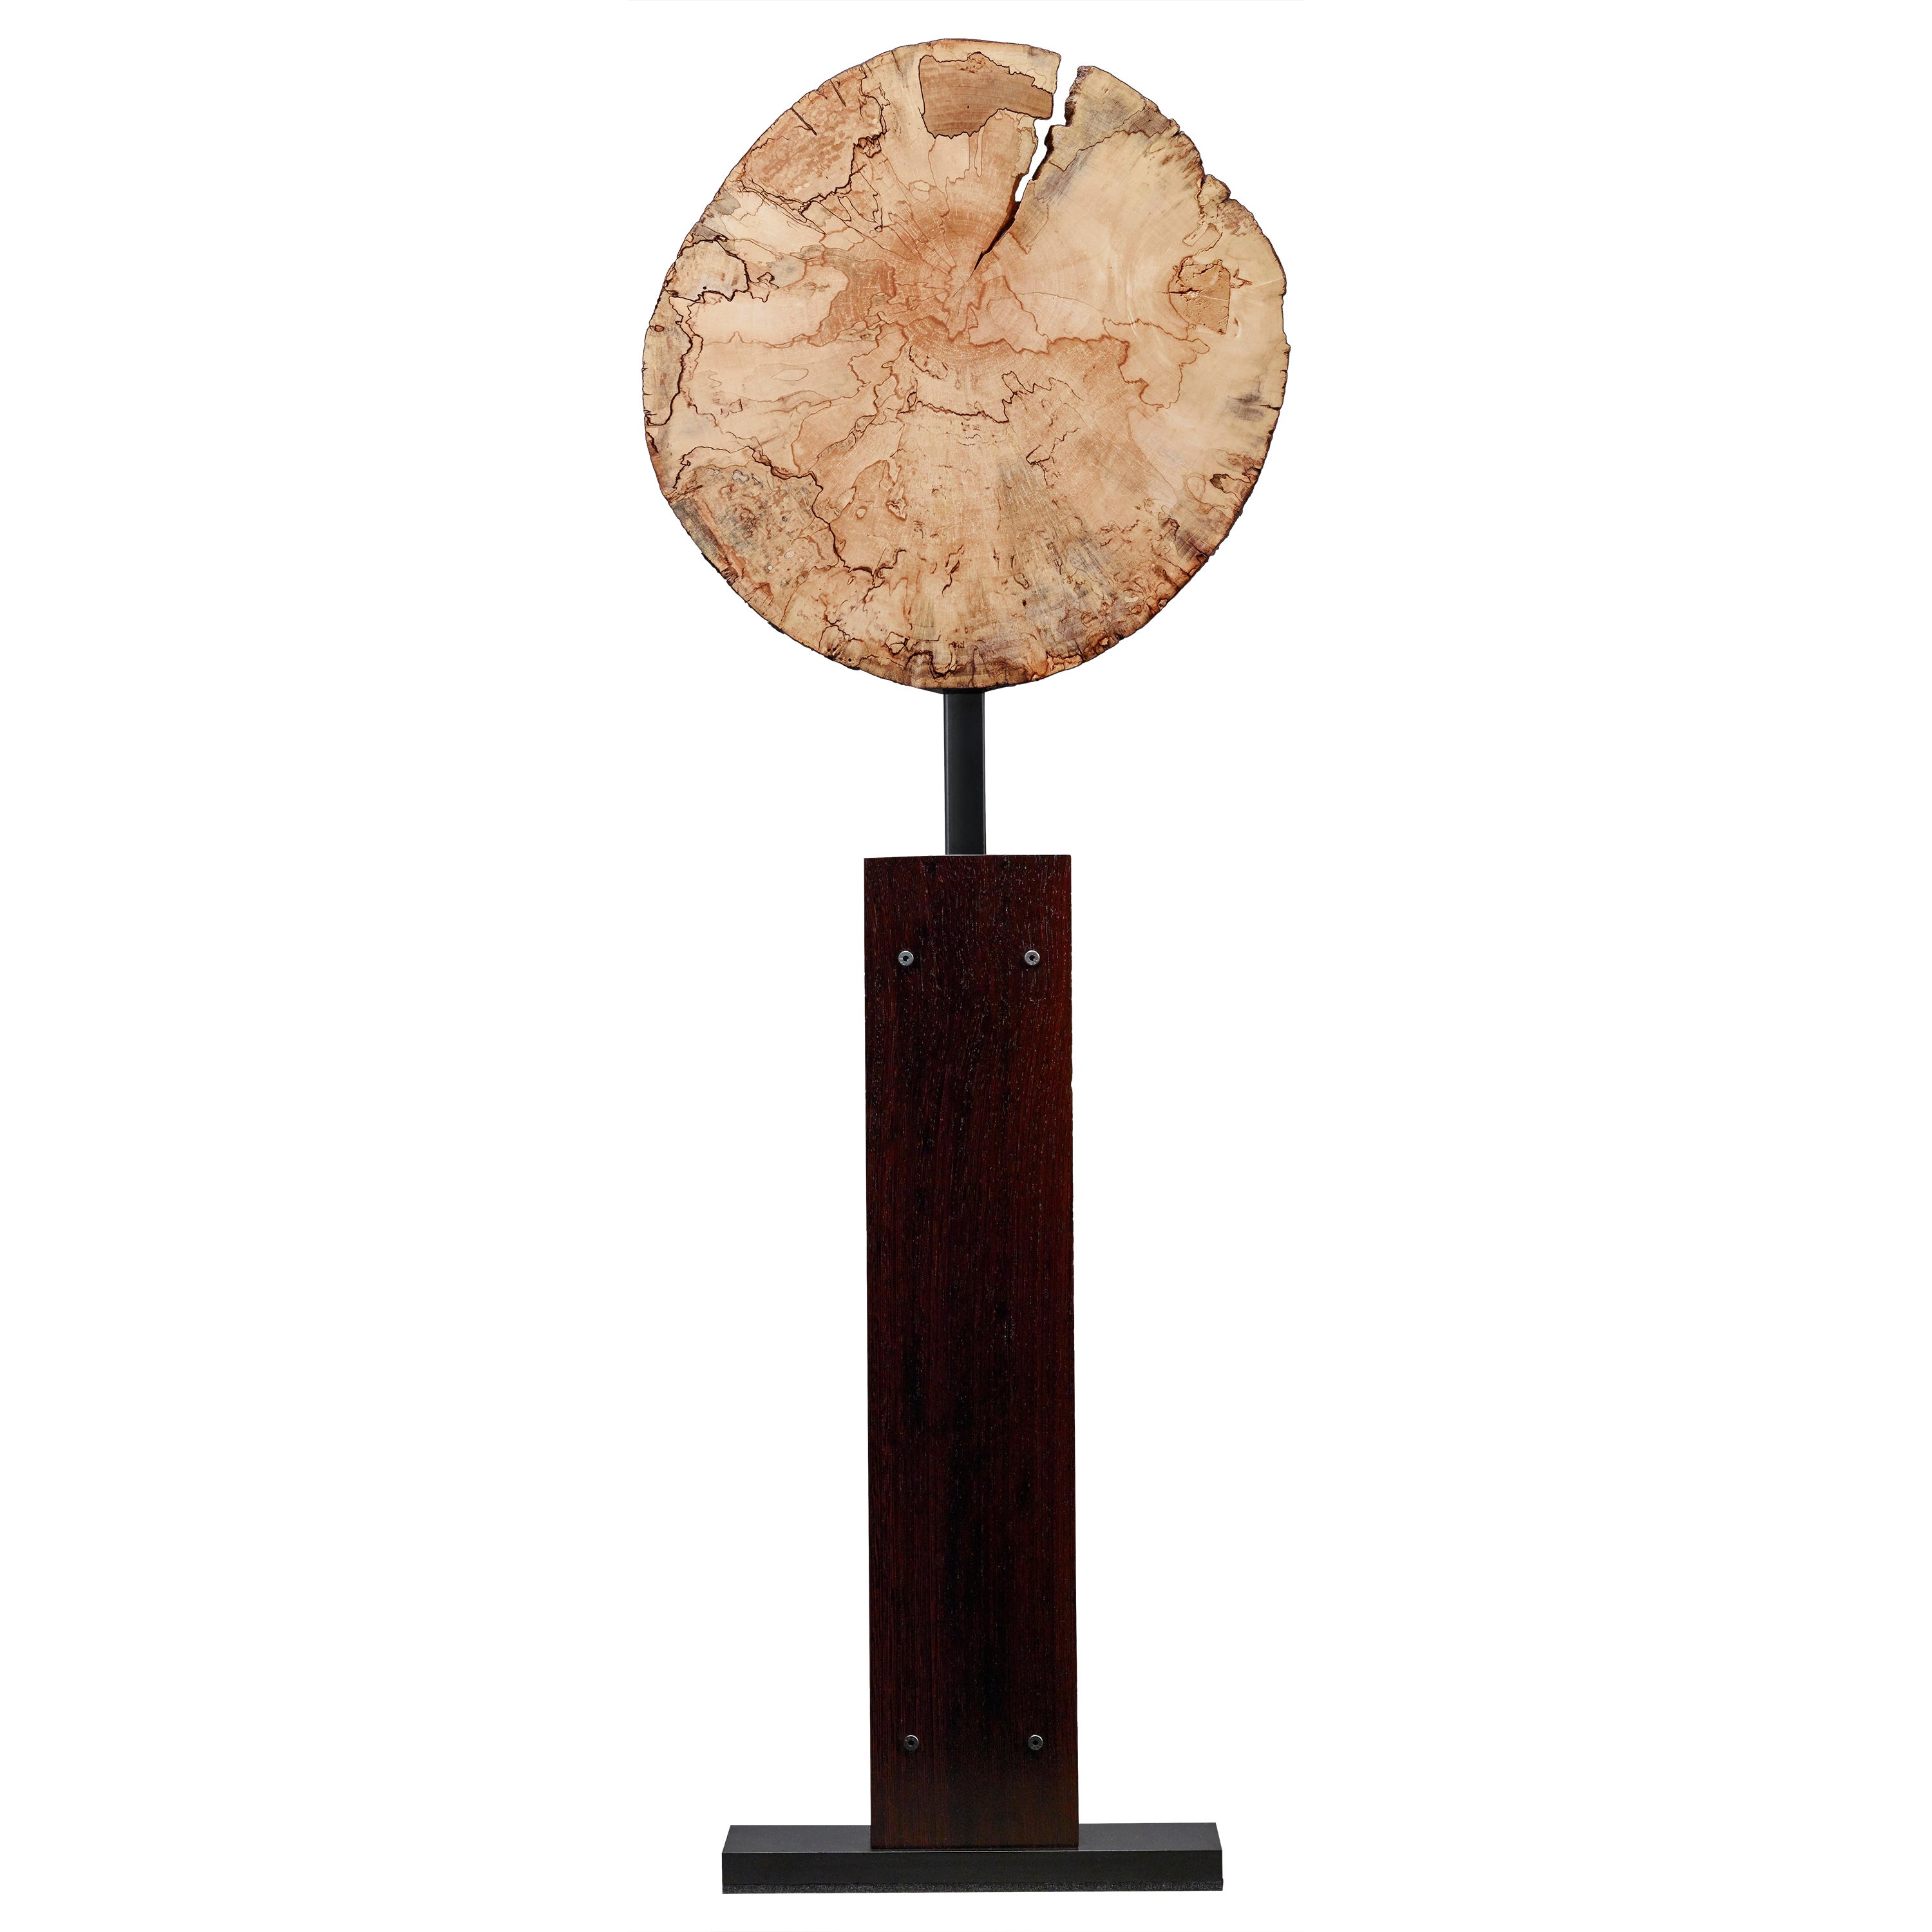 21st Century Modern Organic Table Sculpture with Spalted Maple, Wenge, Nautilus